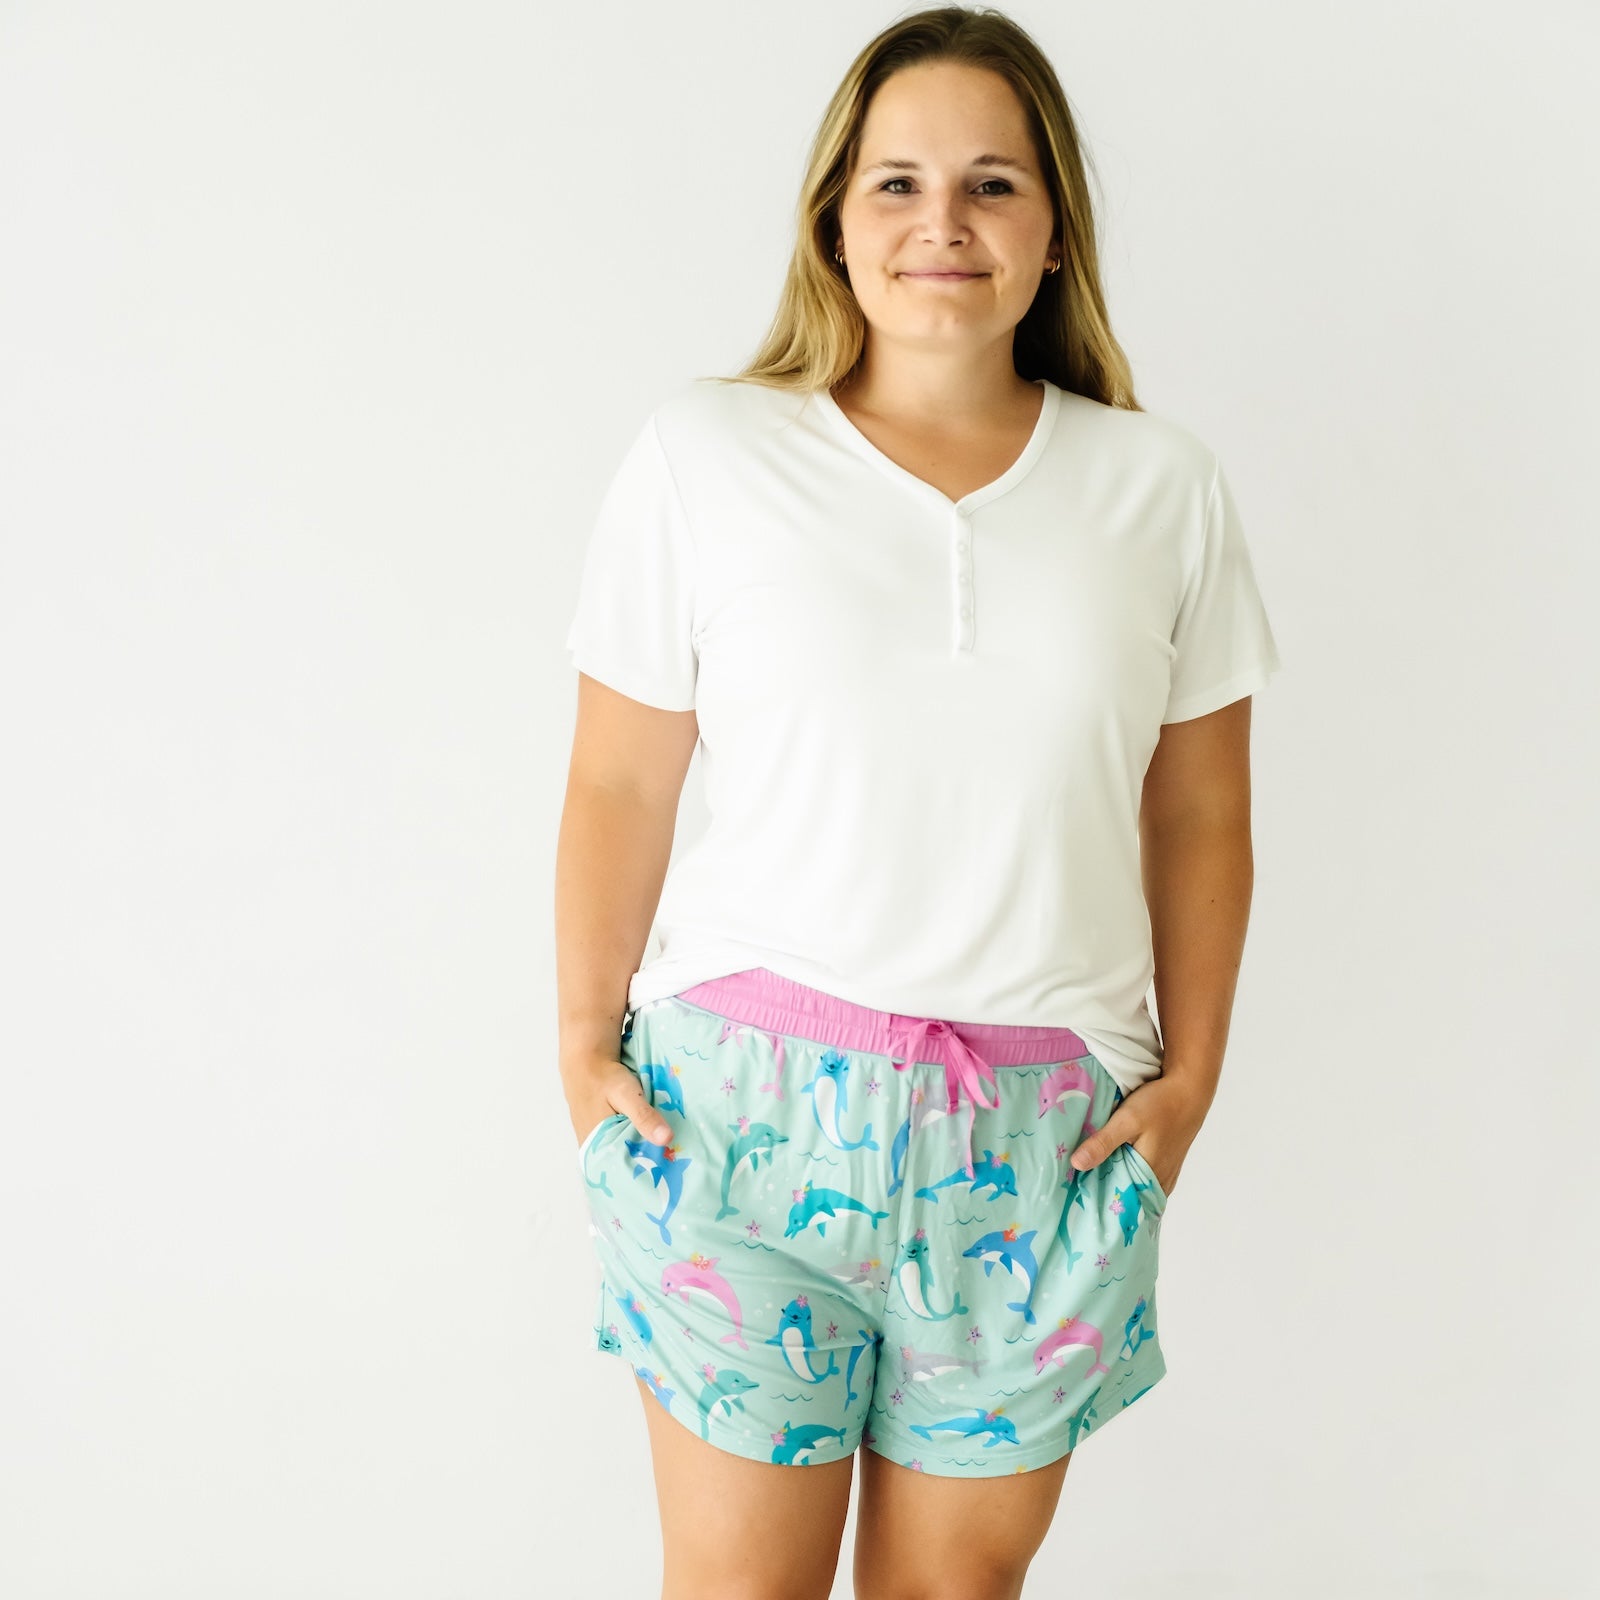 Woman wearing Dolphin Dance women's pajama shorts and coordinating top